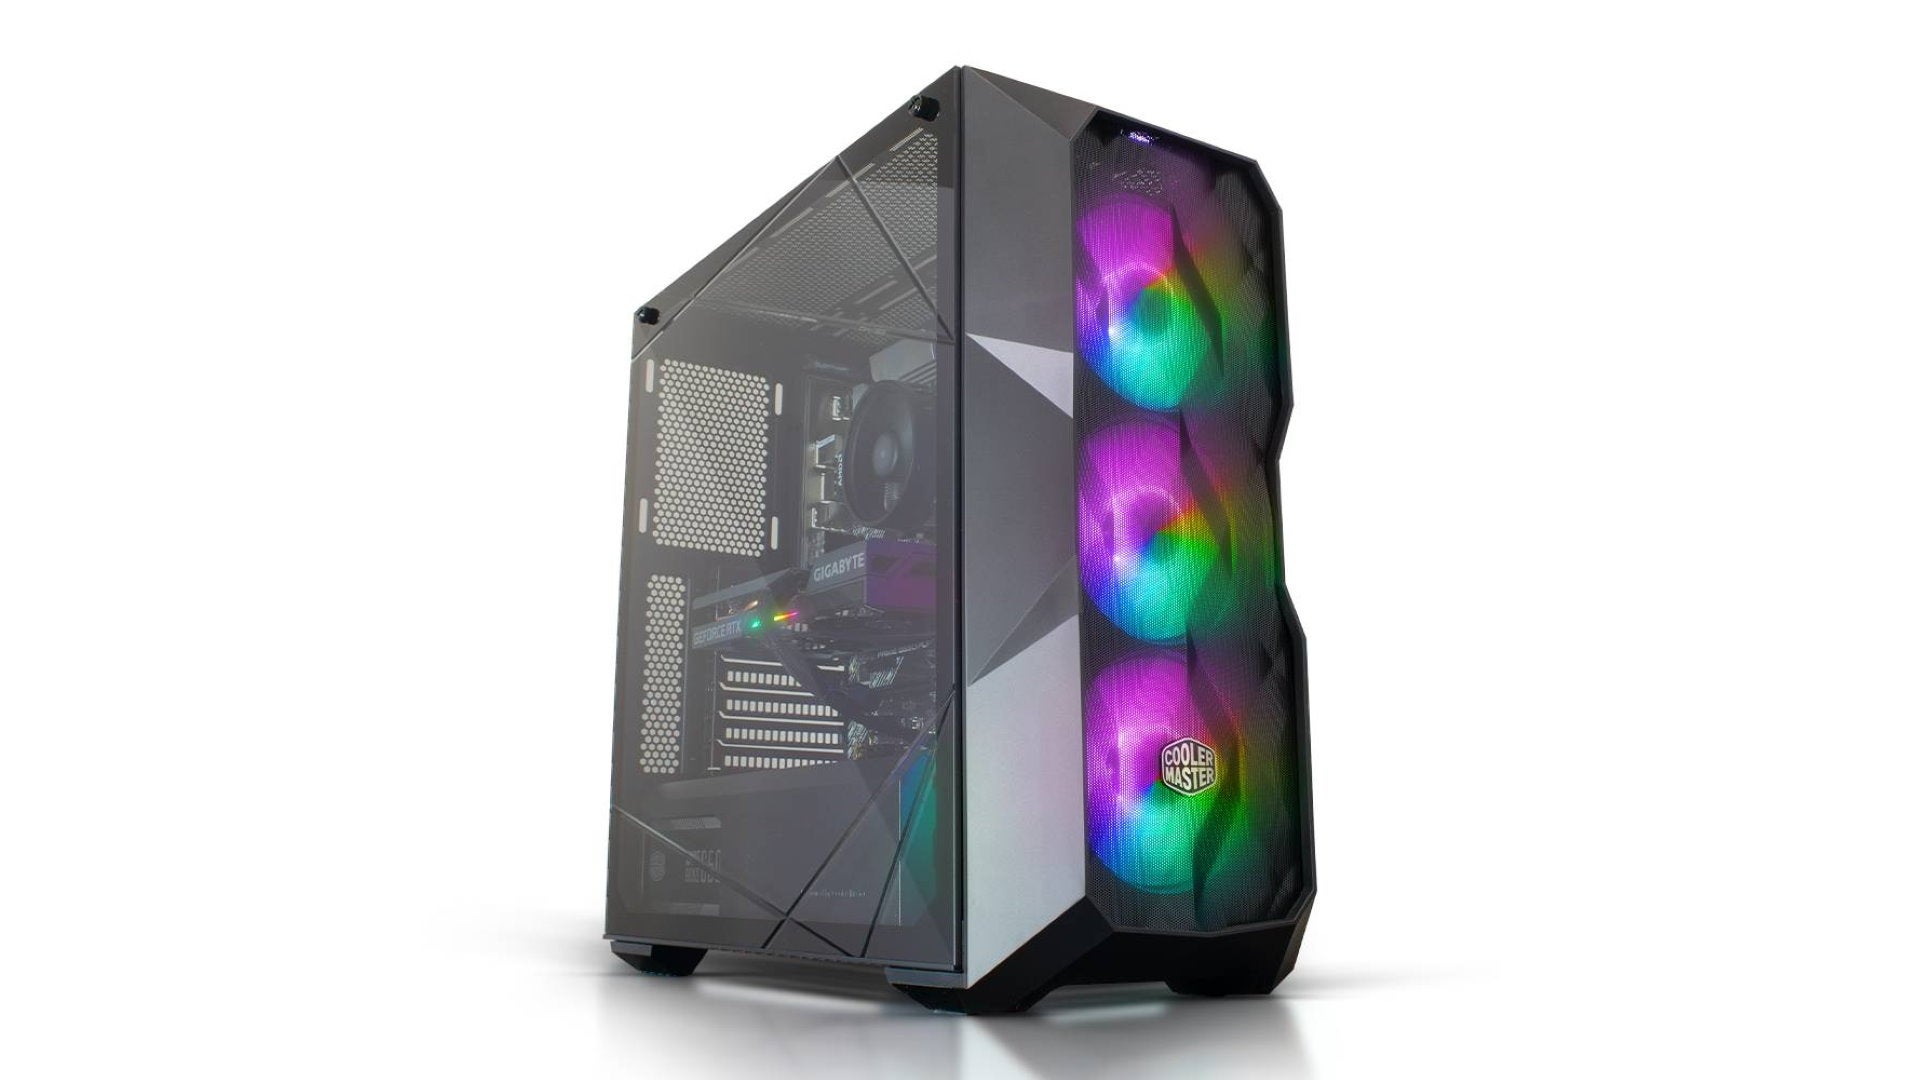 A gaming desktop PC with three RGB fans at the front